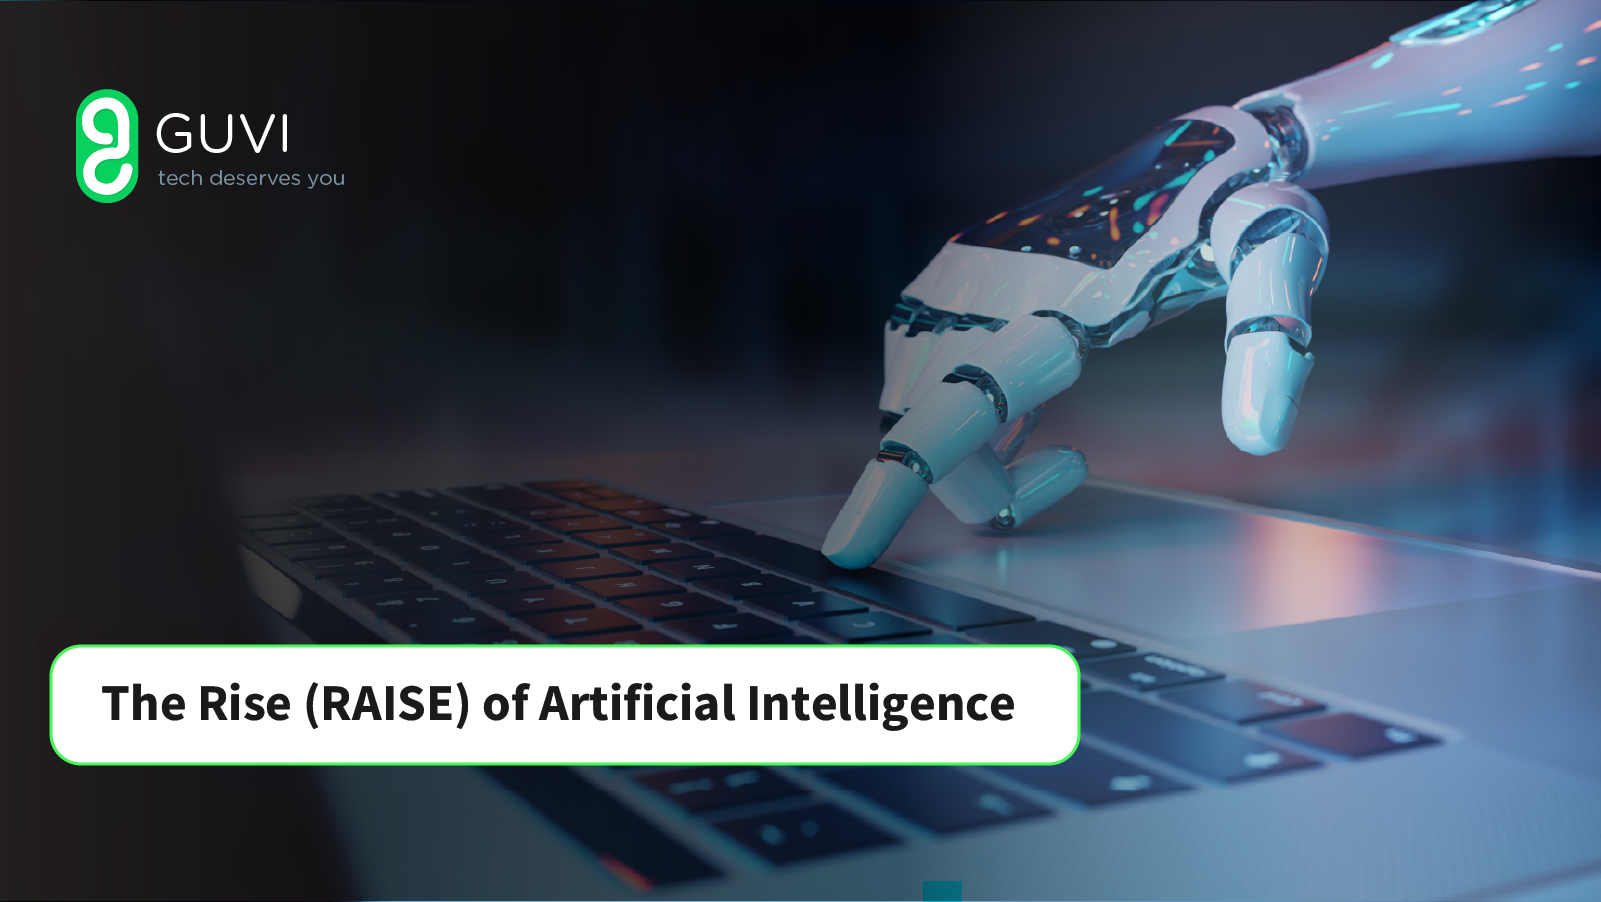 The rise (raise) of artificial intelligence